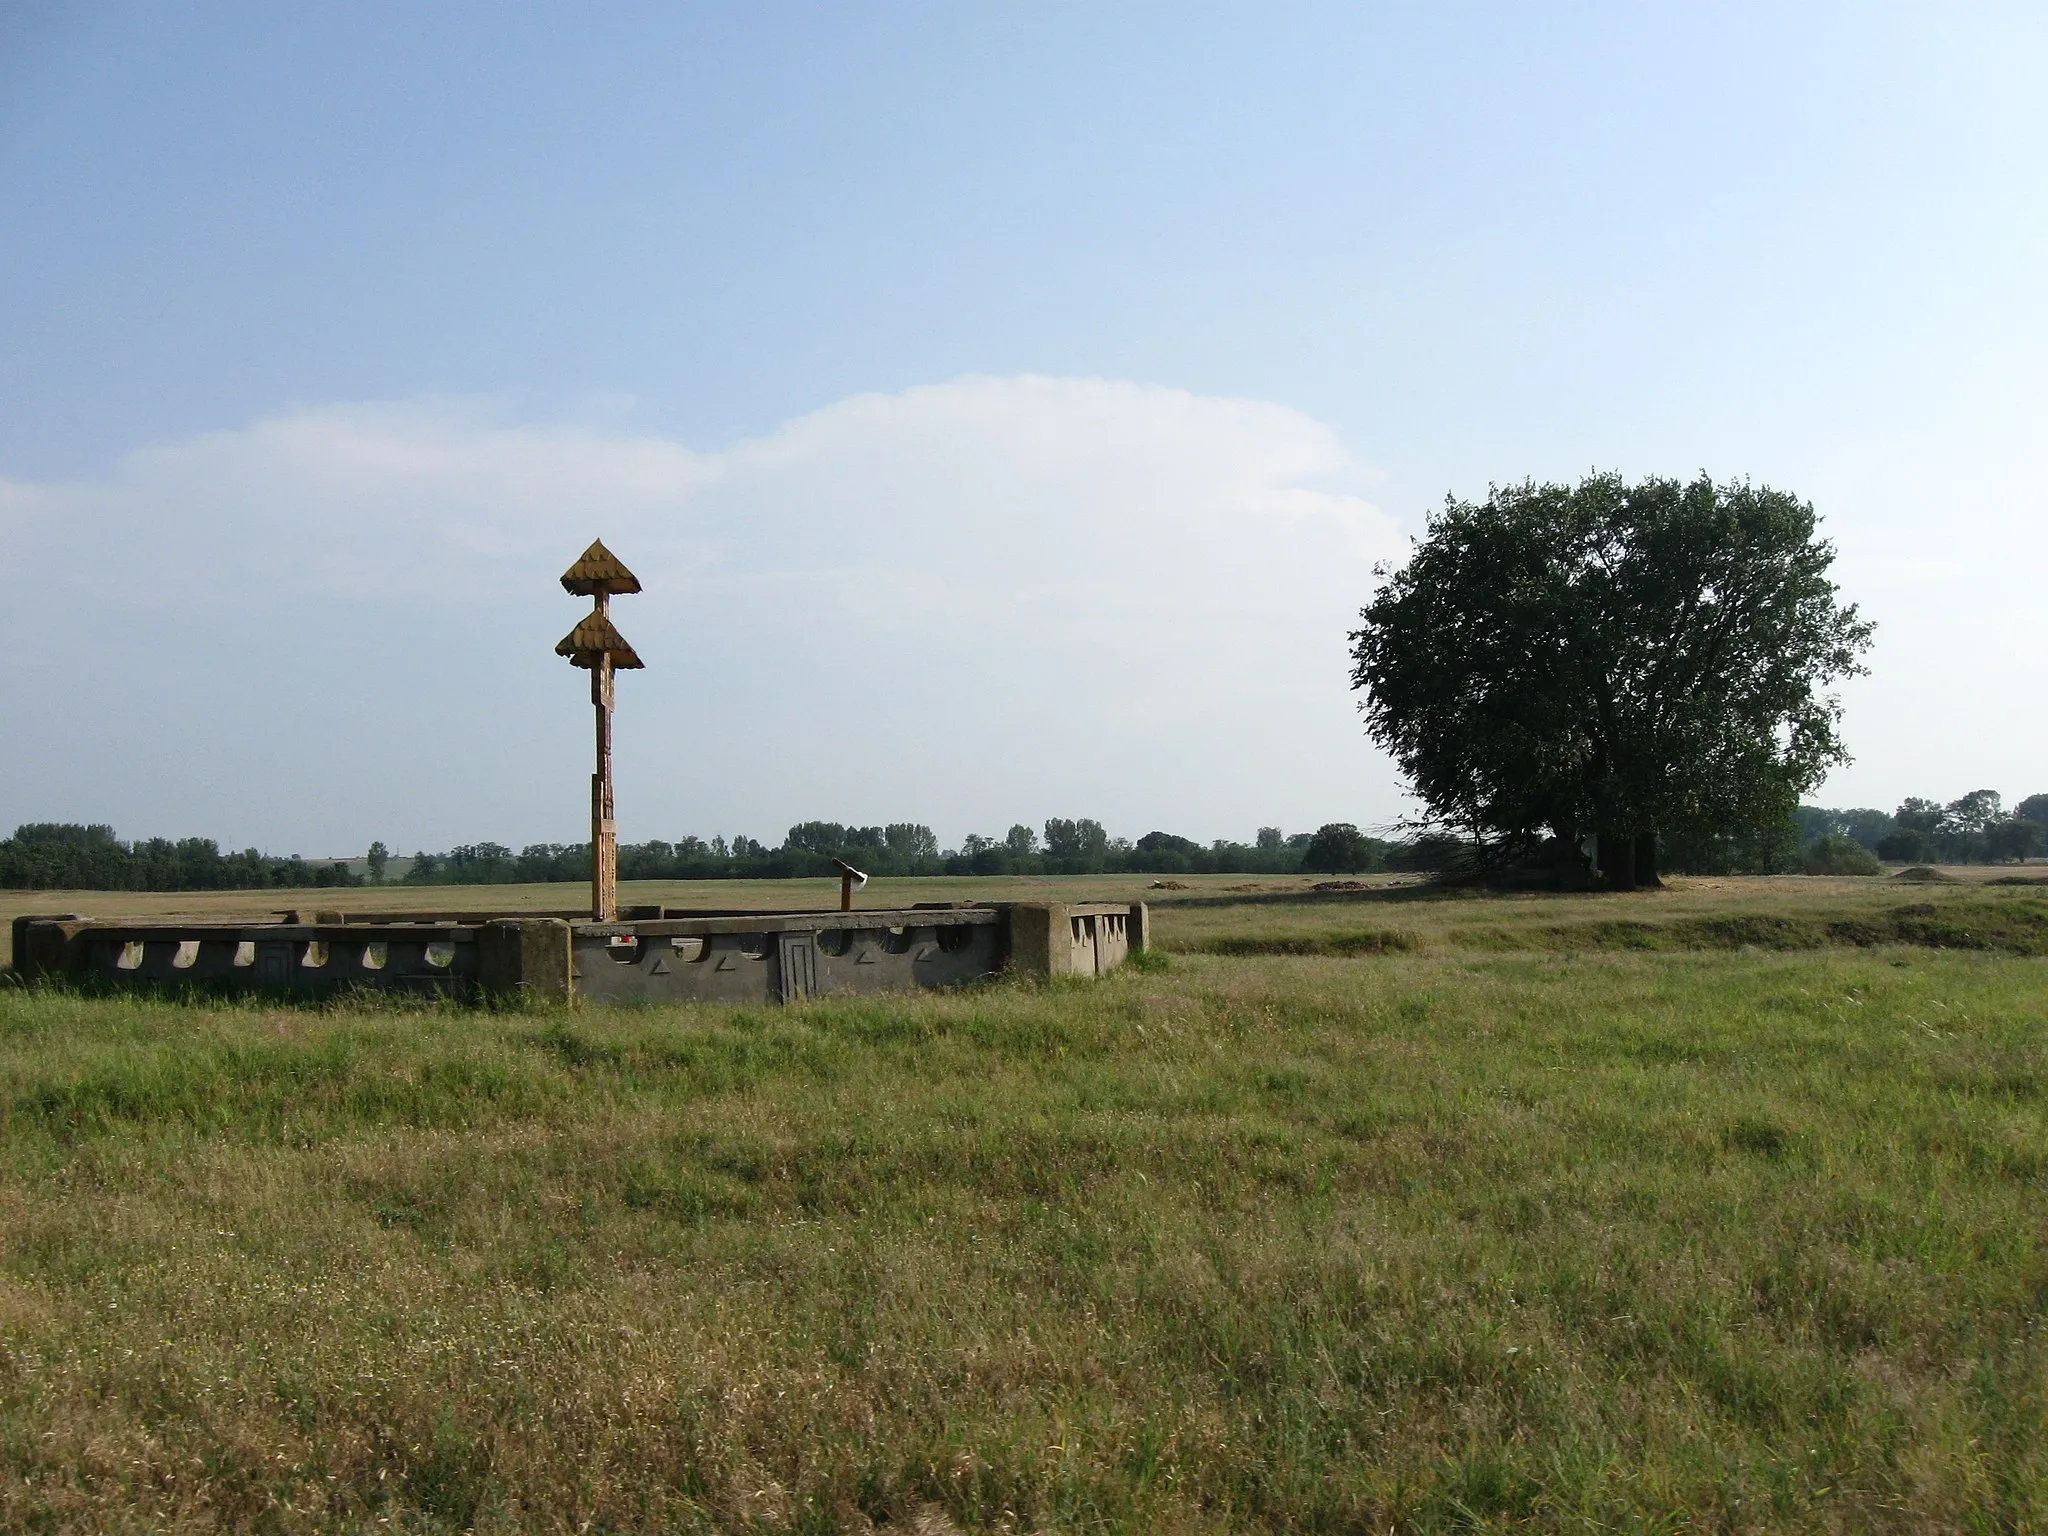 Photo showing: Site where the Romanian shepherd Petrache Lupu claimed to have met with God, on several occassions in 1935. Still revered by some Romanian Orthodox as a holy ground, it was the center of Charismatic worship for much of the interwar period. Located on the outskirts of Maglavit Commune, near Romania's border with Bulgaria, on the northern shore of the lower Danube. Author invokes de minimis on the inclusion of a landmark (votive cross) which may have been erected after 1990, given that Romania does not nominally allow "freedom of panorama", but noting that it would have been impossible to photograph the historical site without also including said monument.